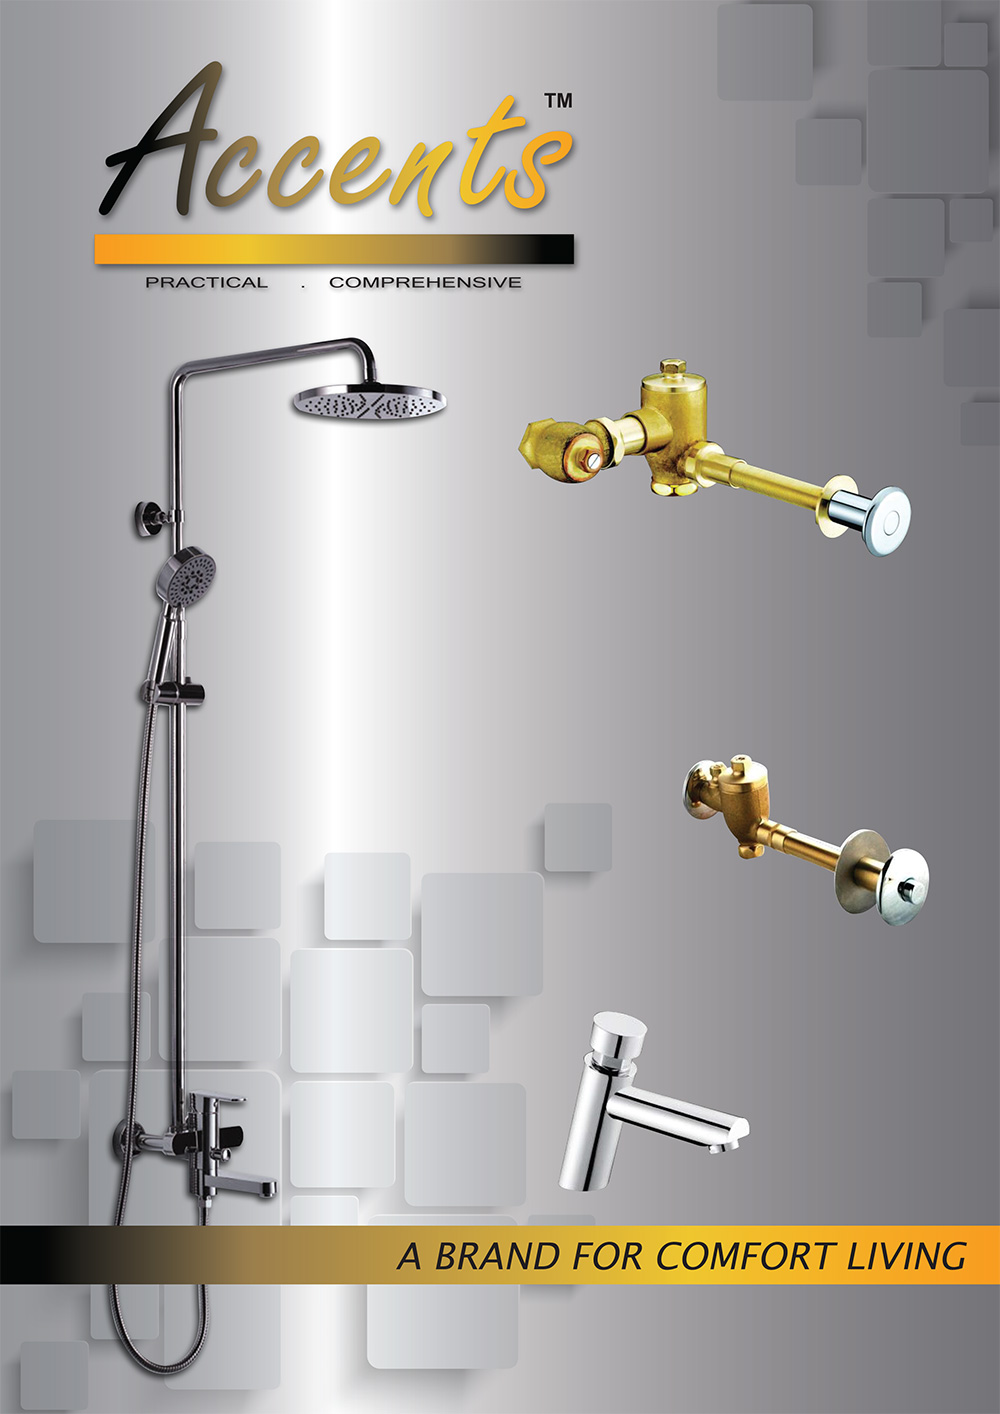 Catalogue-Cover_Accents-Faucets